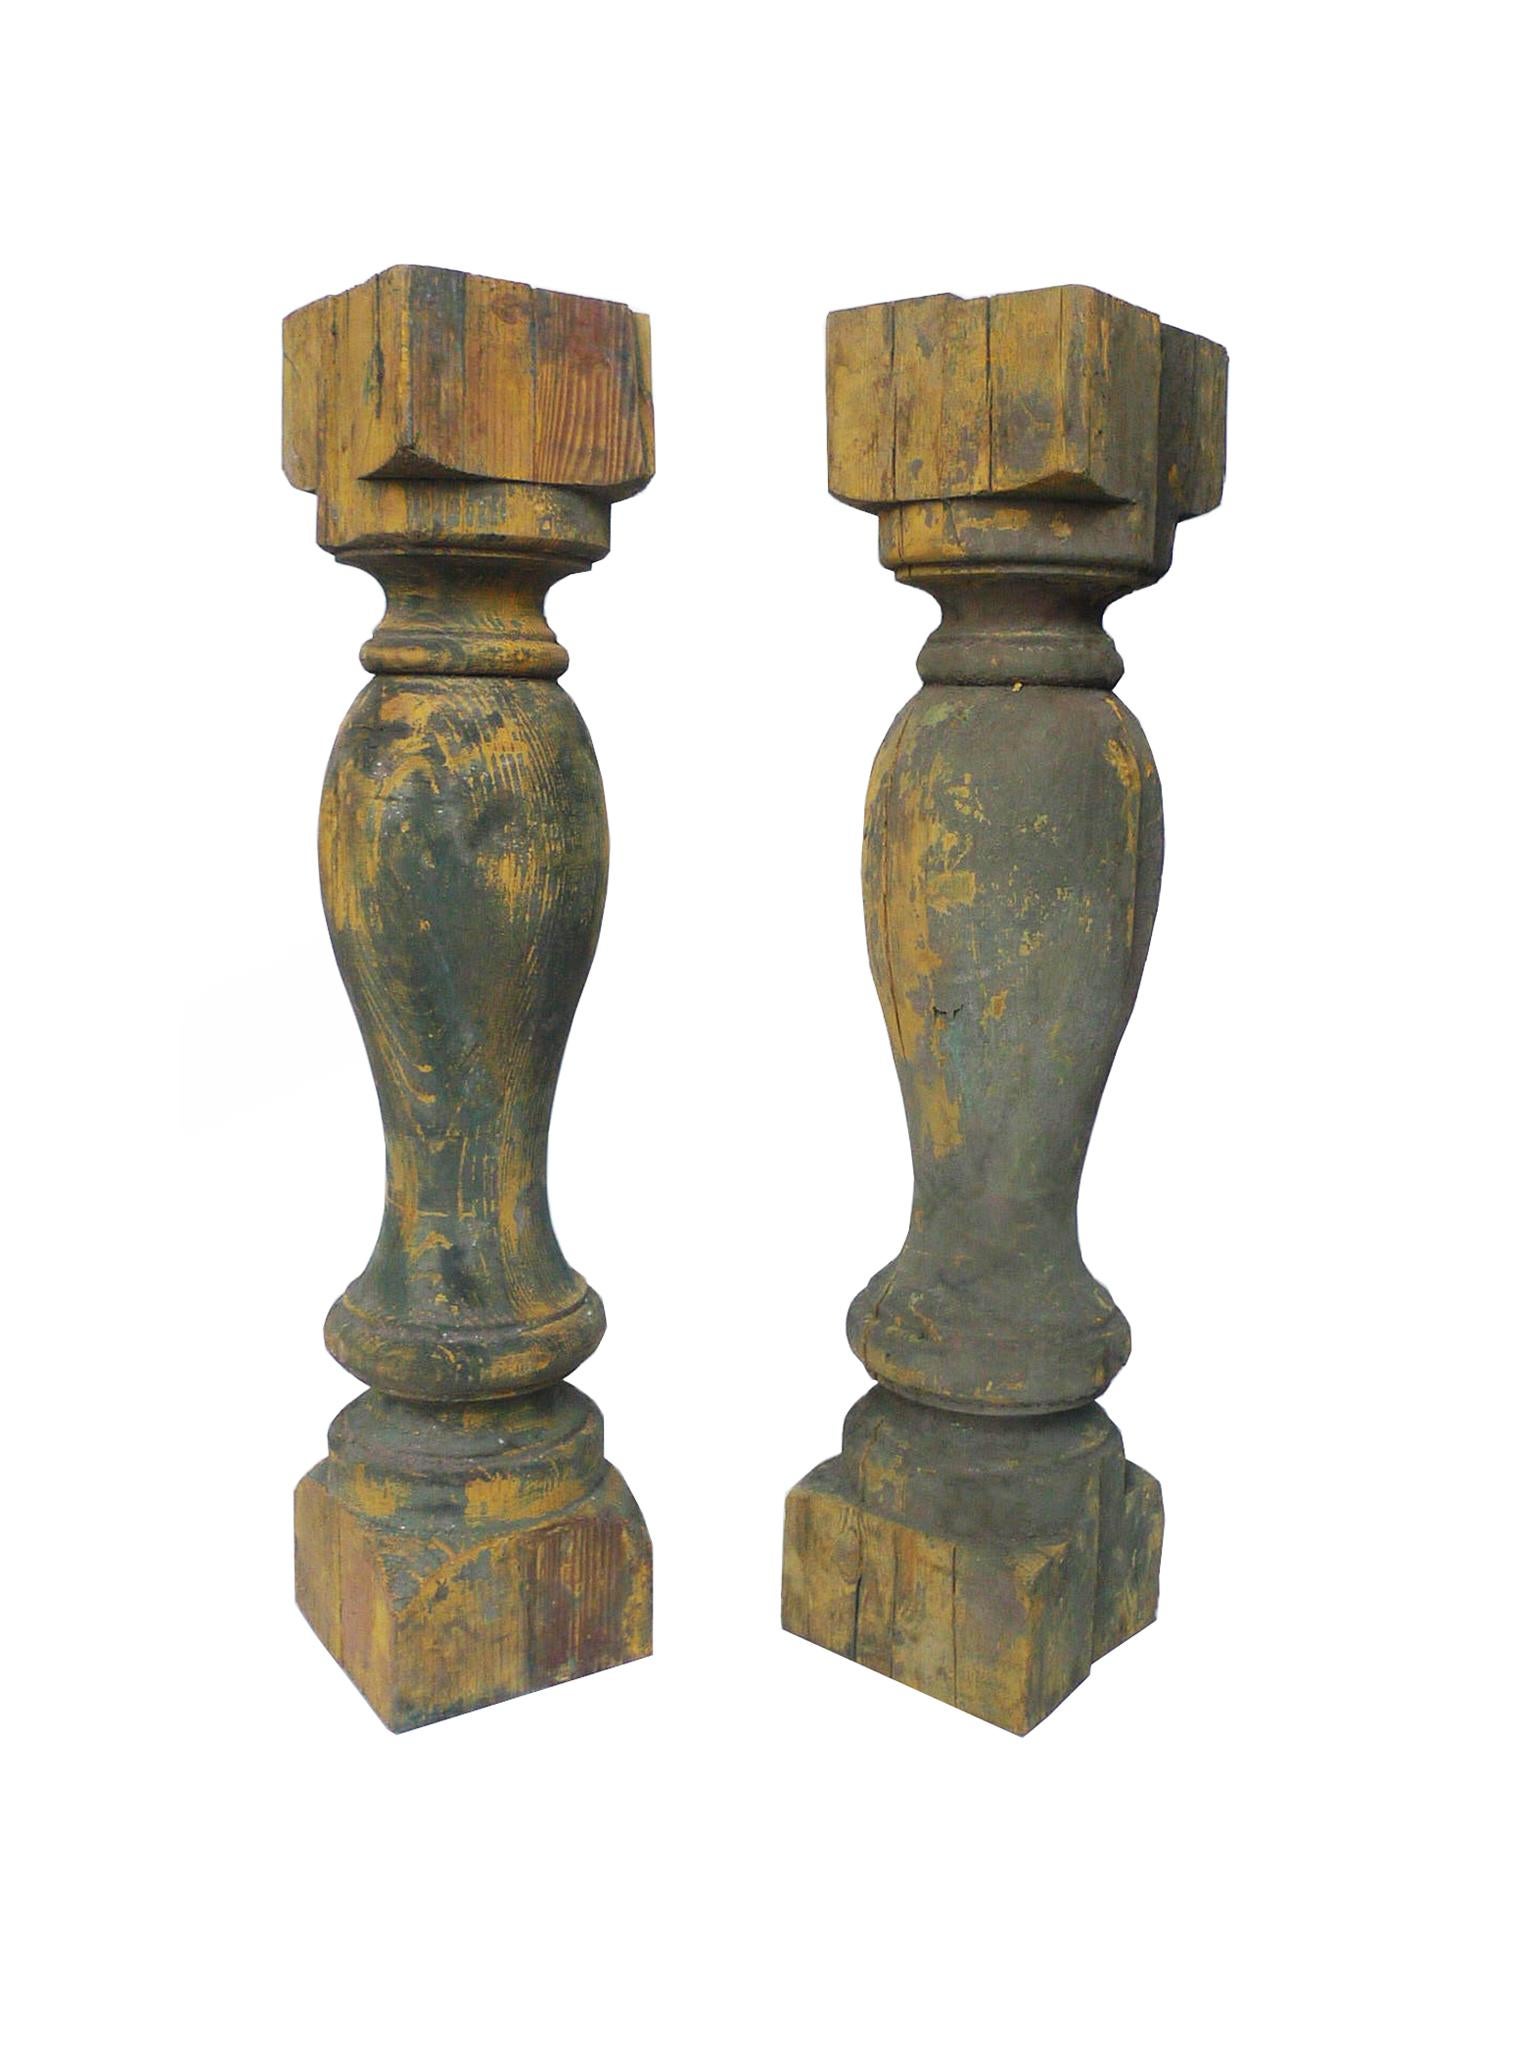 These yellow-painted wood balusters are antique and were handcrafted. They've accrued a beautiful patina of grayish green atop the yellow. As decorative objects, each pair has versatile use. They can be: converted into lamps; used as table legs or